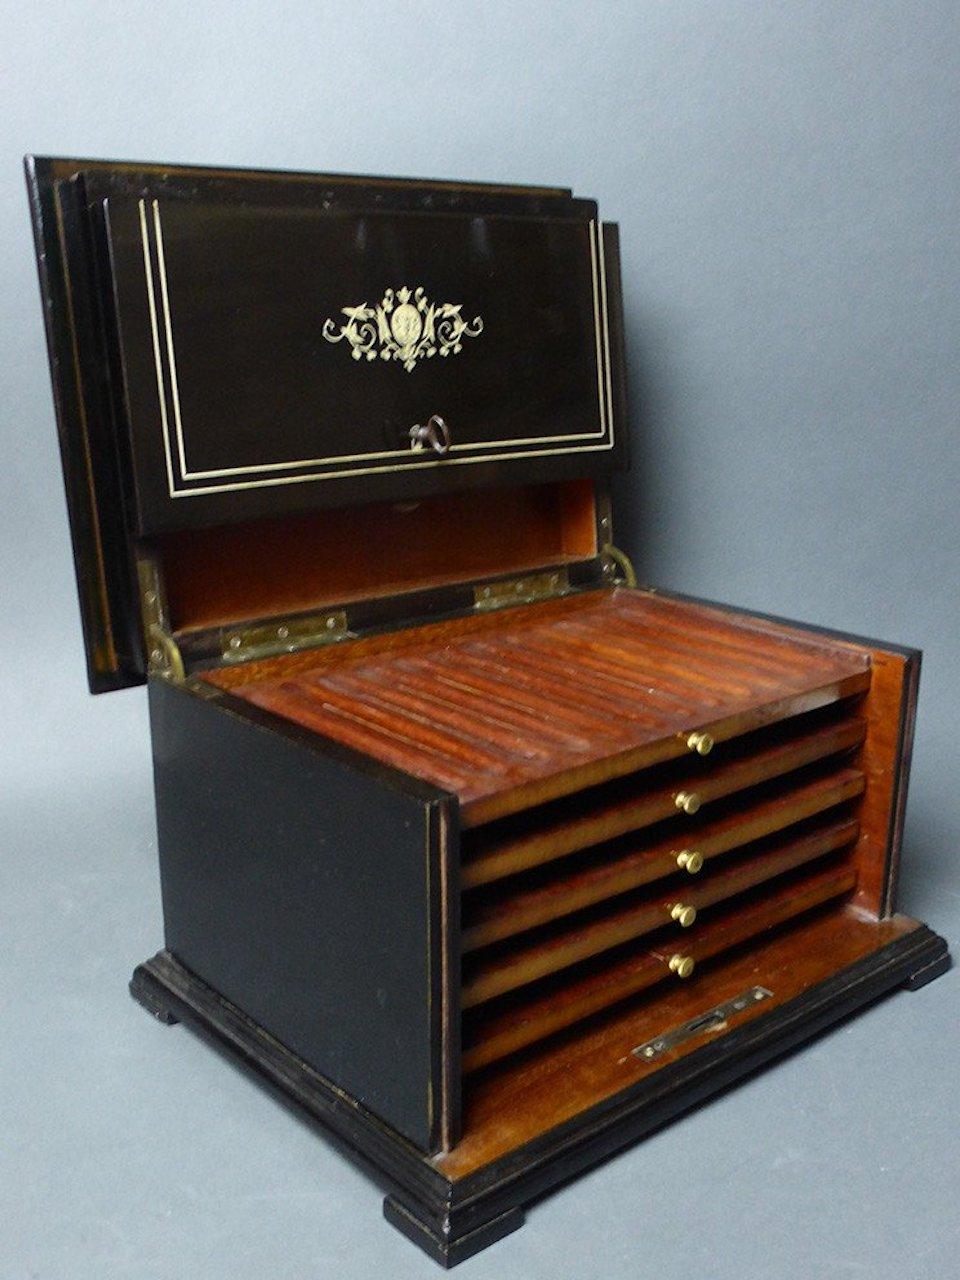 Beautiful Cigar humidor, stamped by Charles Guillaume DIEHL (1811 - 1885), in ebony with inlaid decoration of friezes of scrolls, fleurons and lanceolate leaves, inside with five drawers. 
Signature on the lock: Diehl 12 rue Michel Lecomte